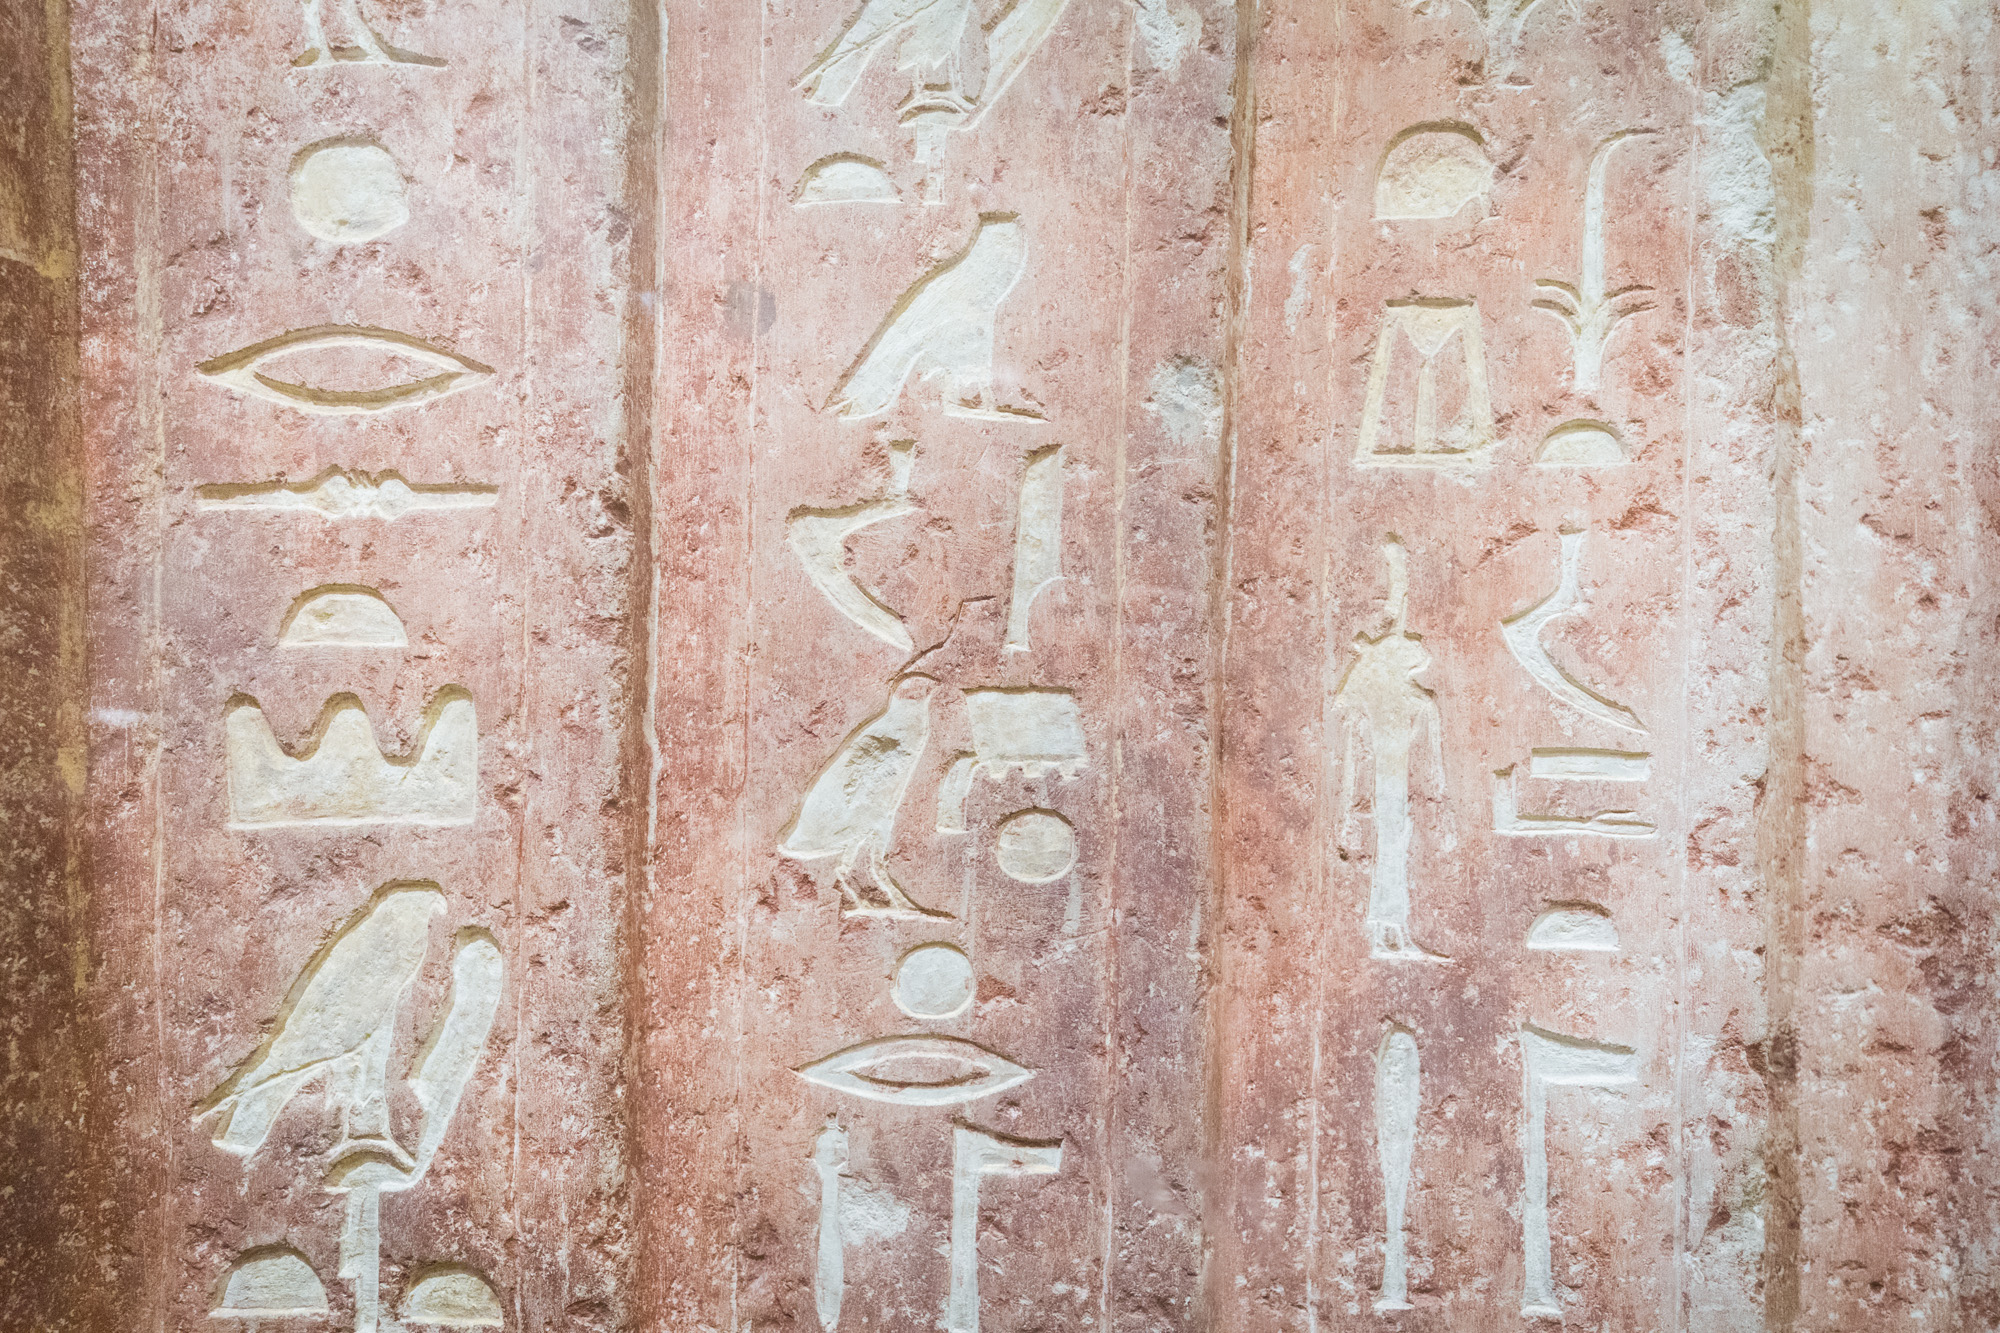 Three columns of hieroglyphs carved into the faded stone wall of a mastaba.